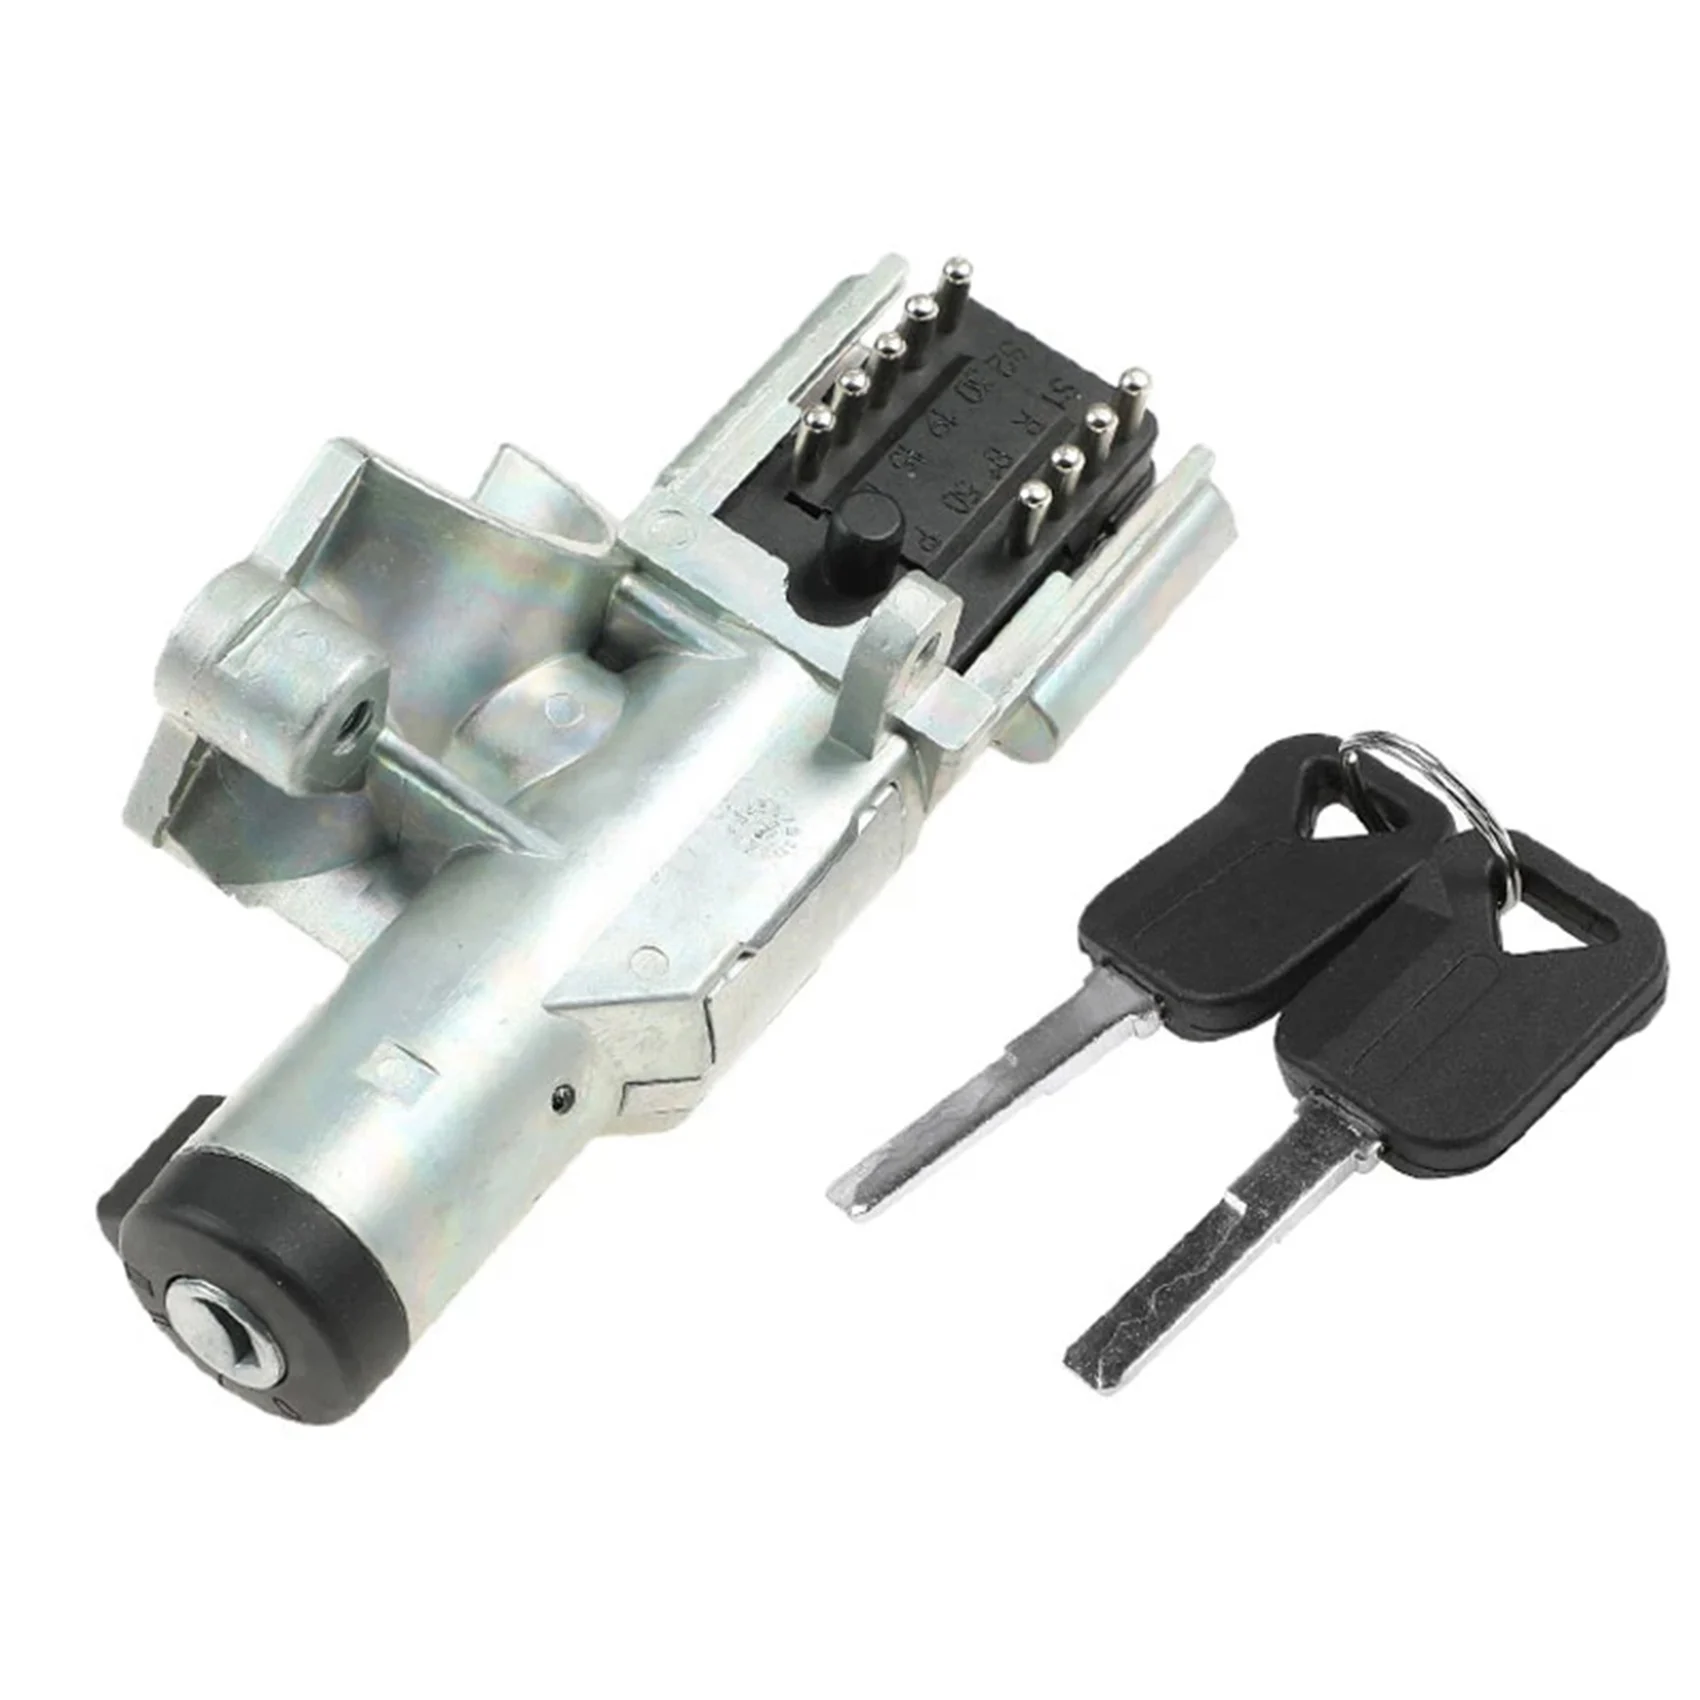 

20398484 Truck Large Car Ignition Lock Start Switch with 2 Keys Door Lock Core for Volvo Truck VOE